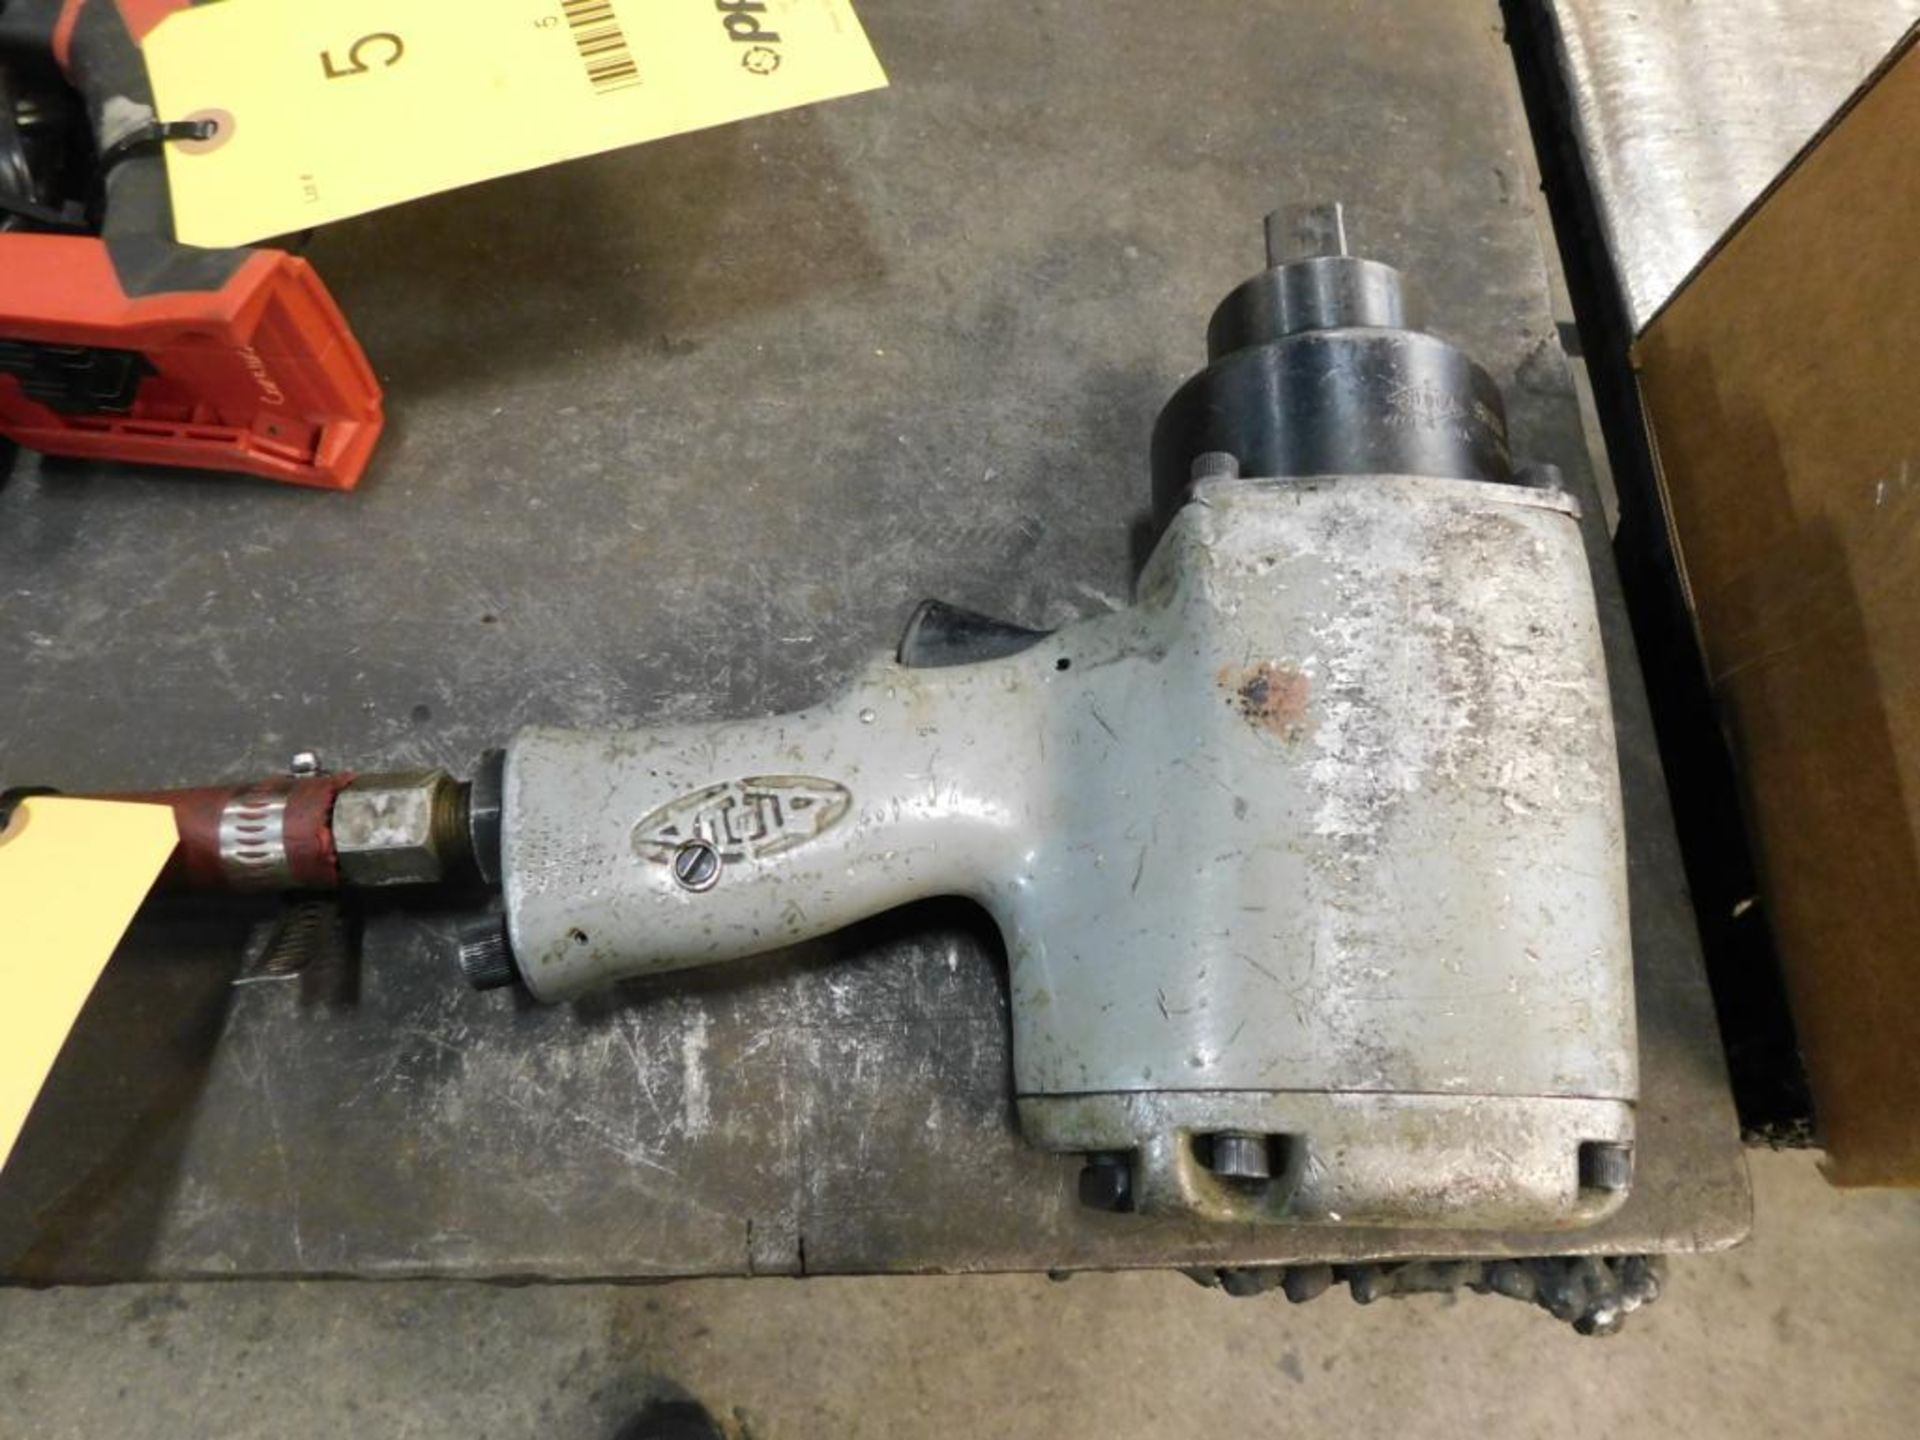 Sioux 3/4 in. Pneumatic Impact Wrench